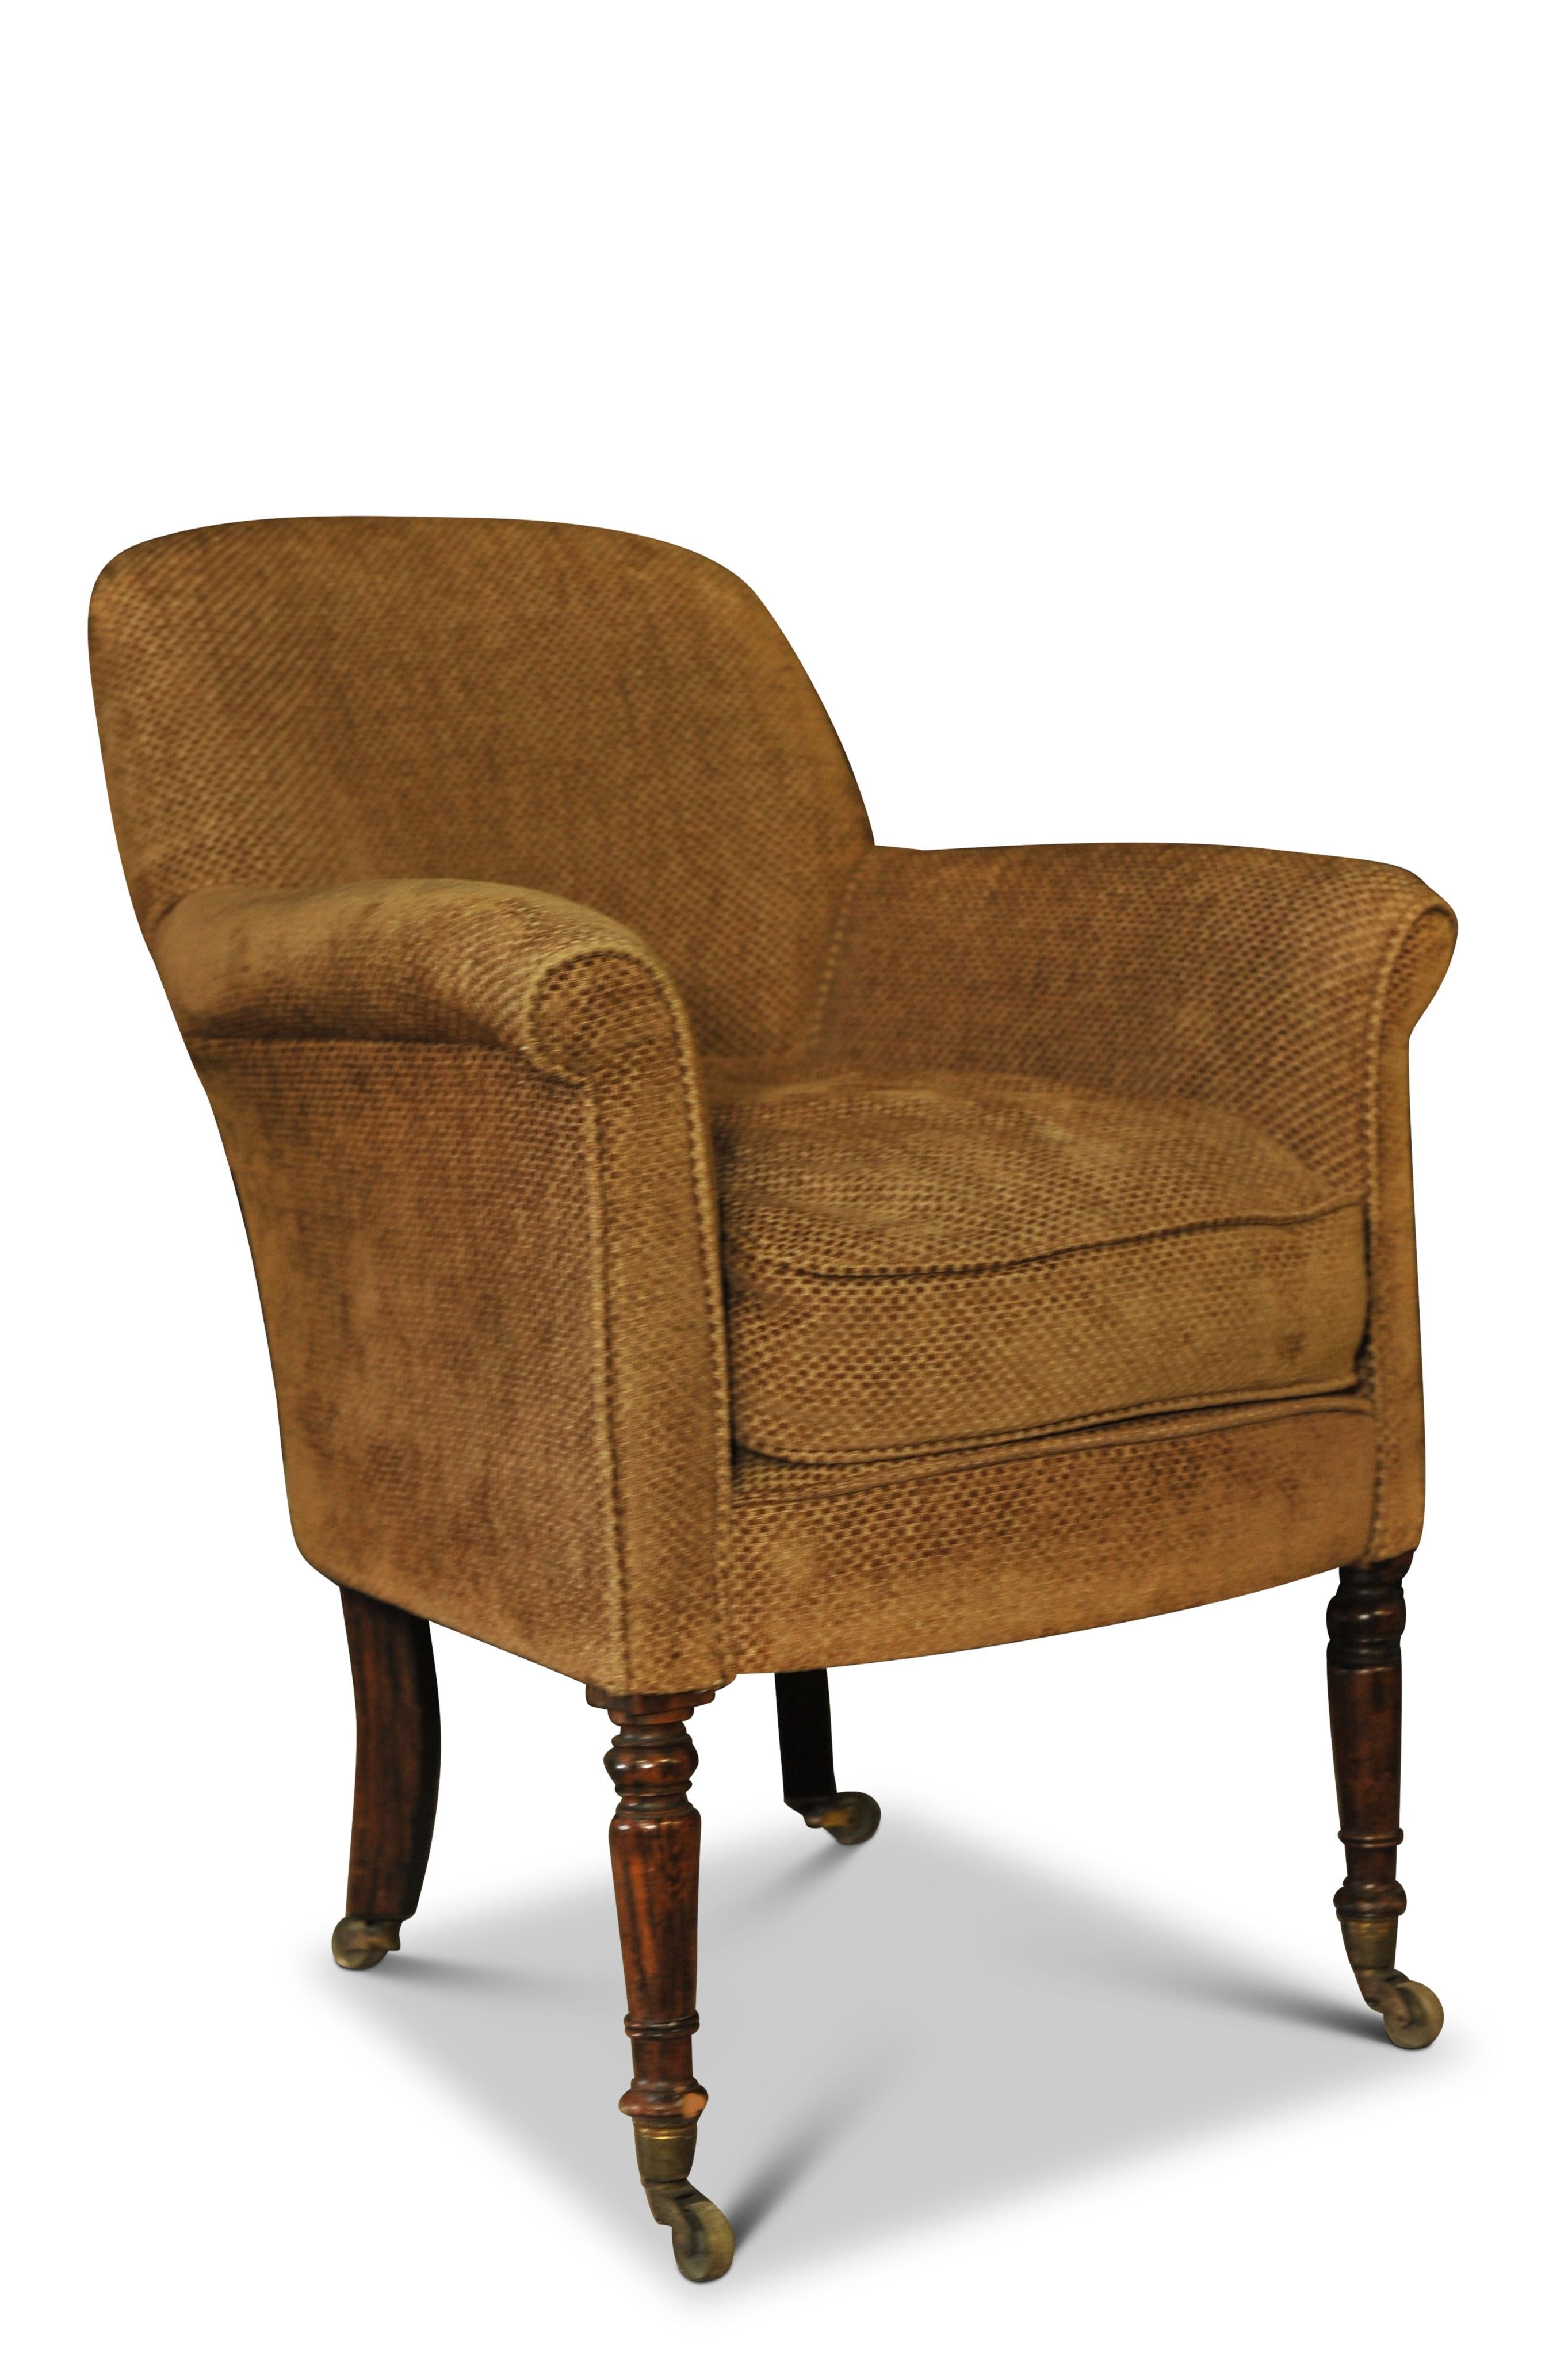 Elegant 19th Century William IV Tub Chair On Original Brass Castors & Sabre Legs With A Chenille Upholstery.

Full chair height 87cm
Chair width arm to arm 66cm
Chair depth from front to most rear 81cm
Depth of under seat at 52cm

Seat depth front